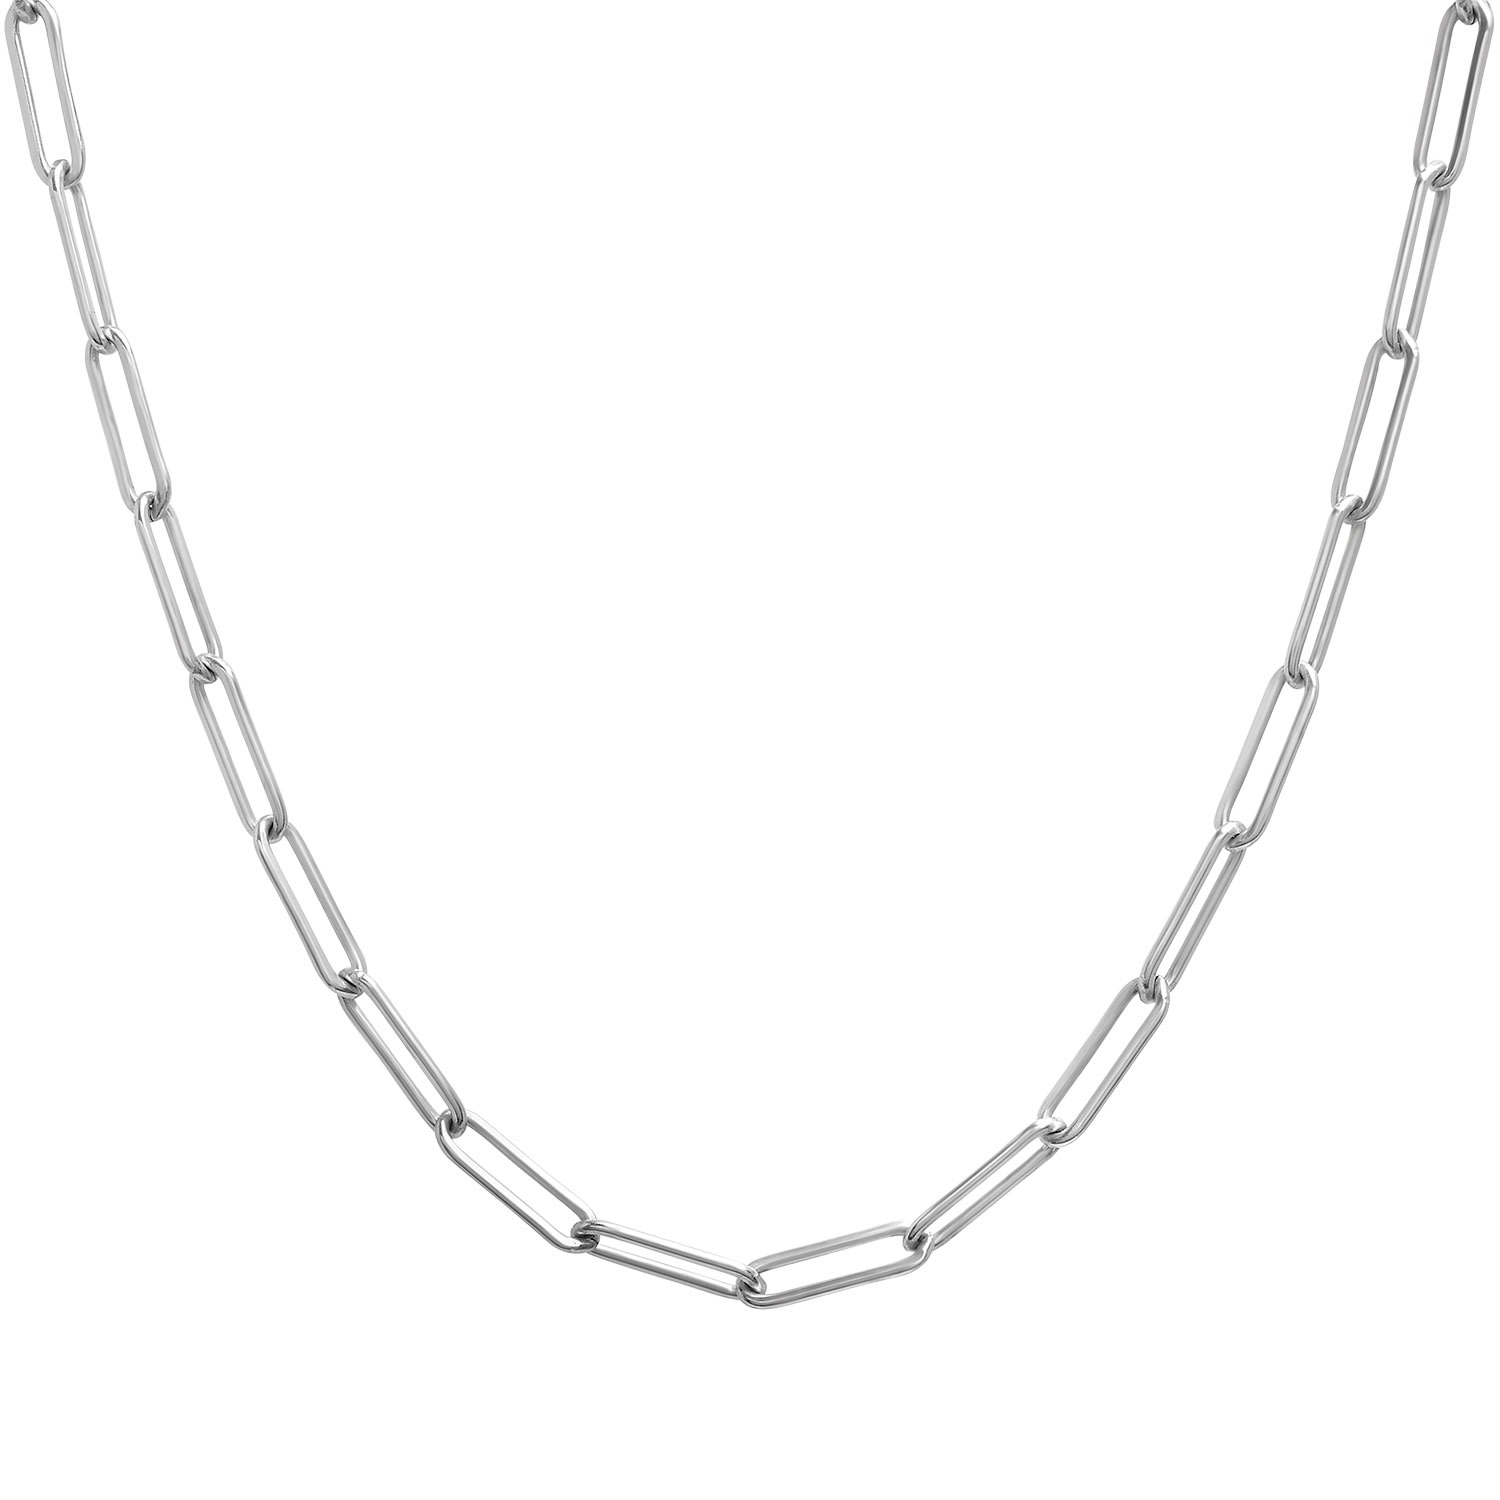 Women’s Silver Paperclip Chain Necklace With Toggle Closure Miki & Jane